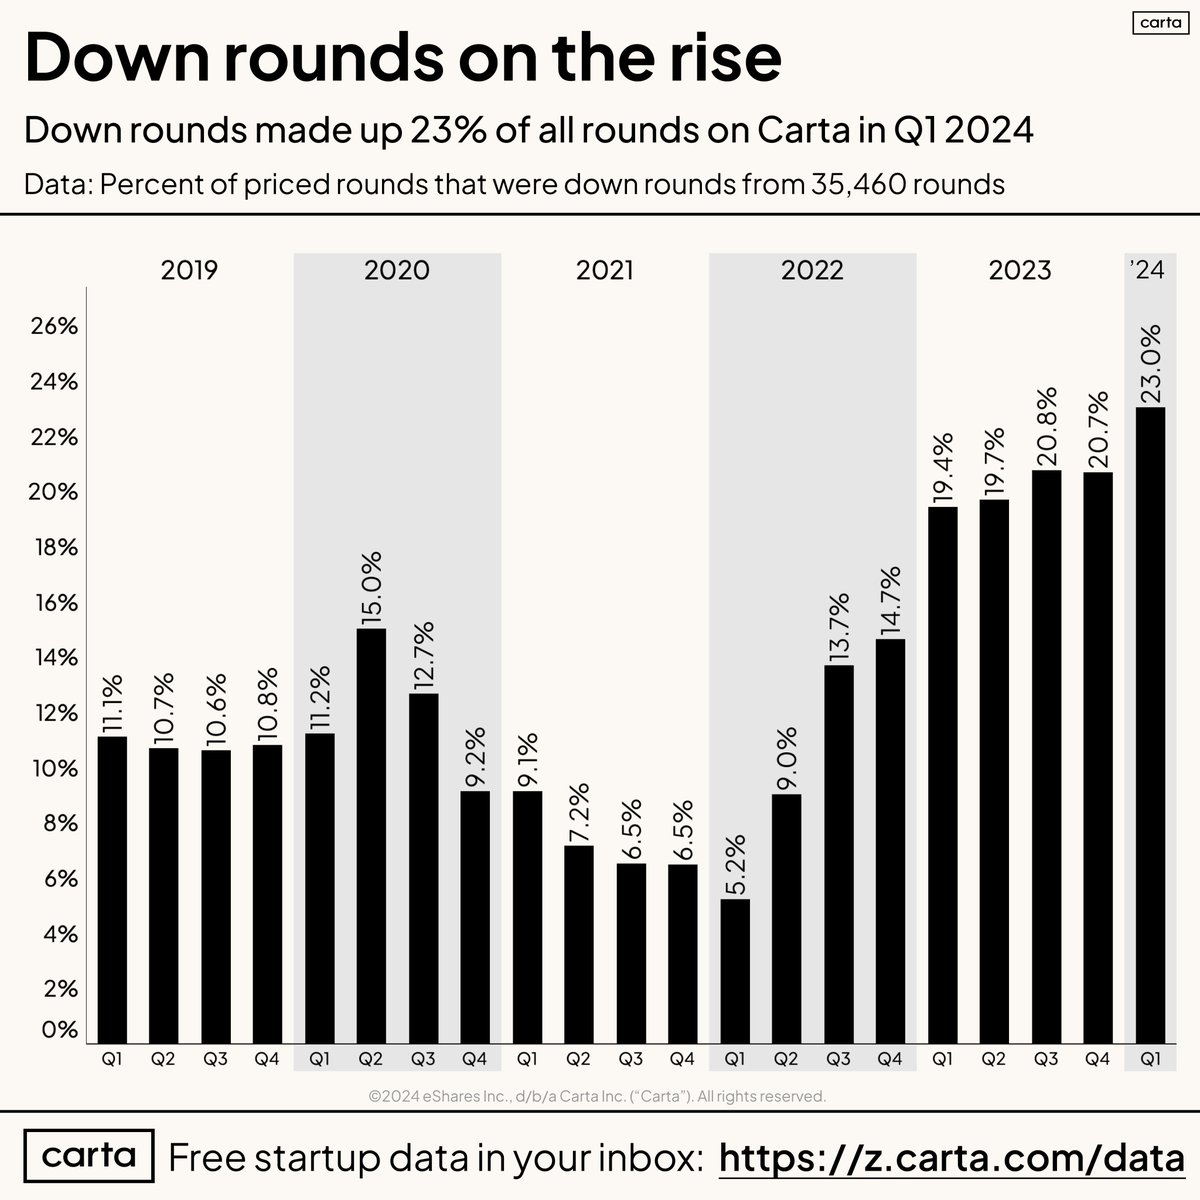 Down rounds rising - nearly a quarter of US venture rounds were down rounds in Q1. Obviously not great, but at least those companies are getting a chance to move forward with a more realistic approach - many are having to shutdown instead.